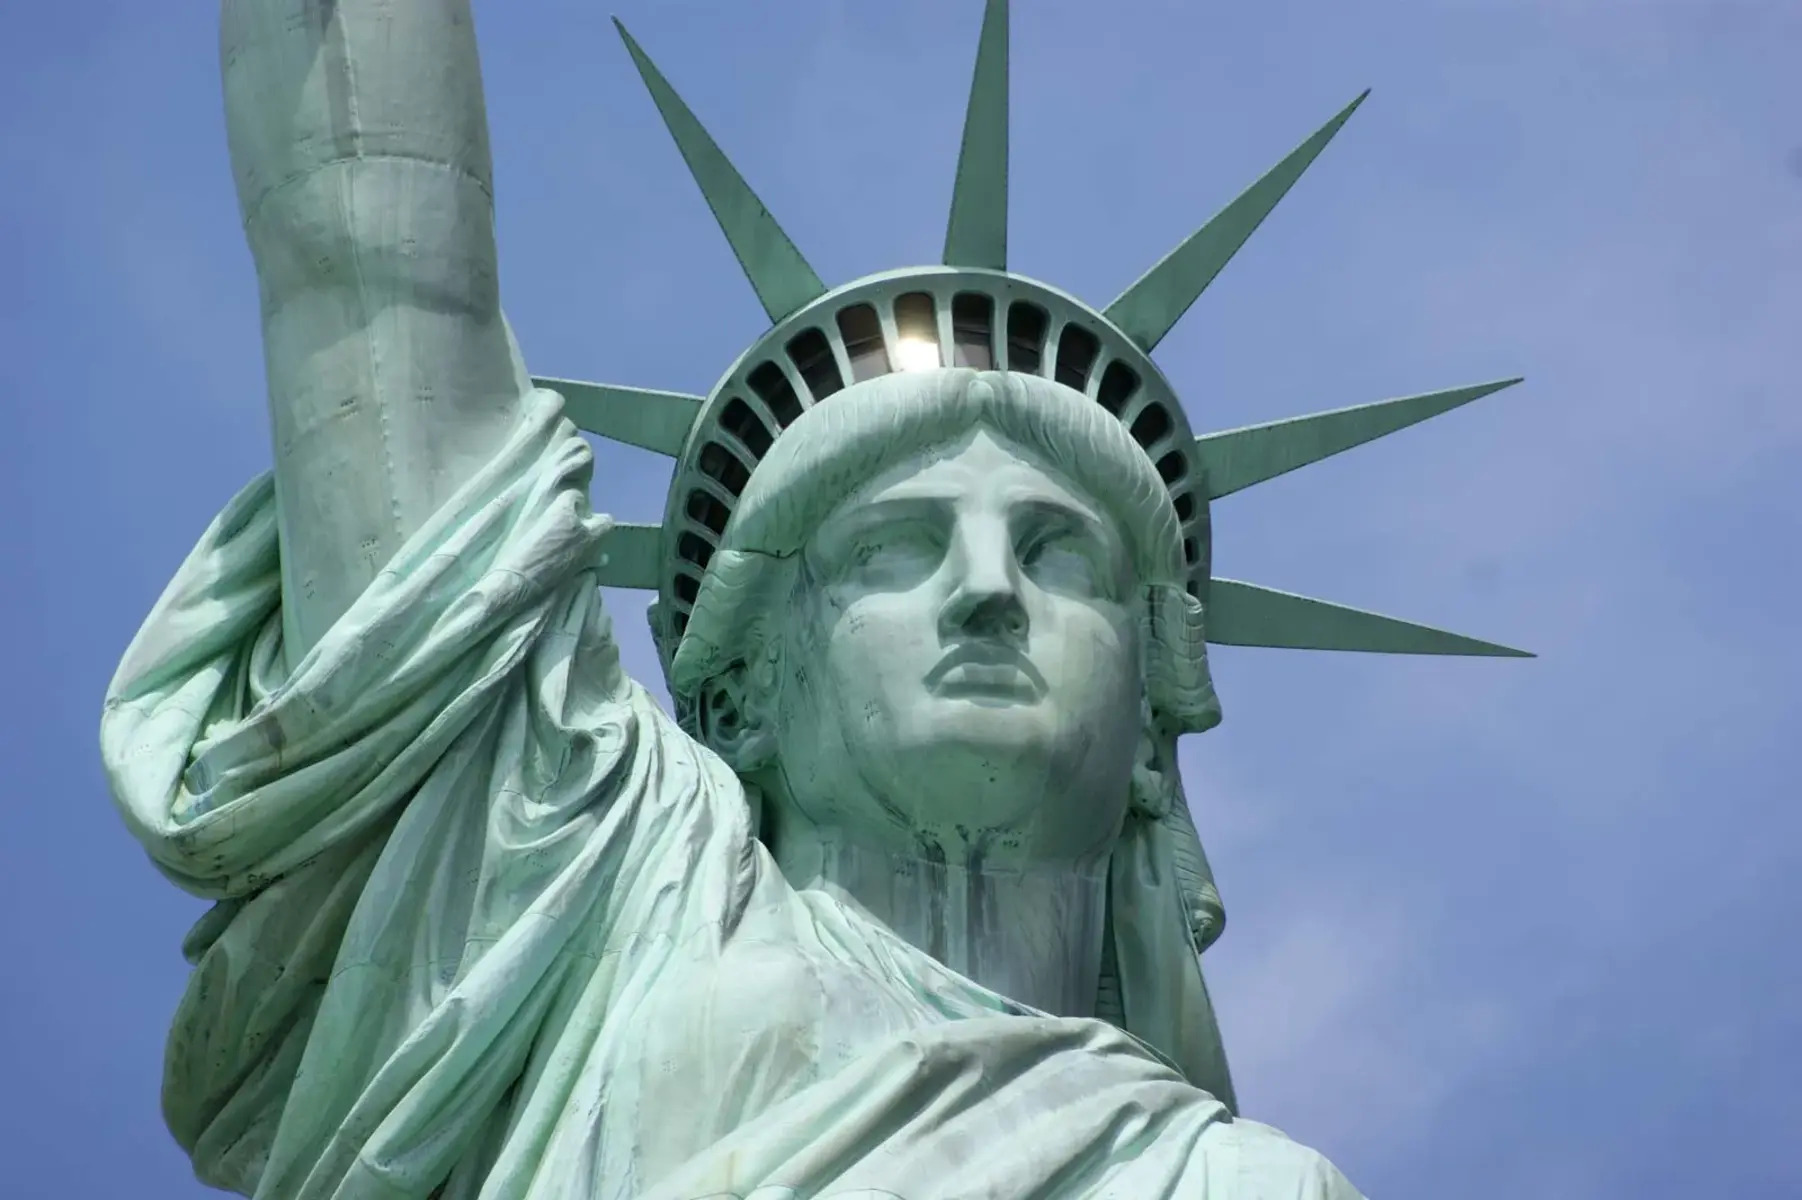 who-was-the-sculptor-of-the-statue-of-liberty